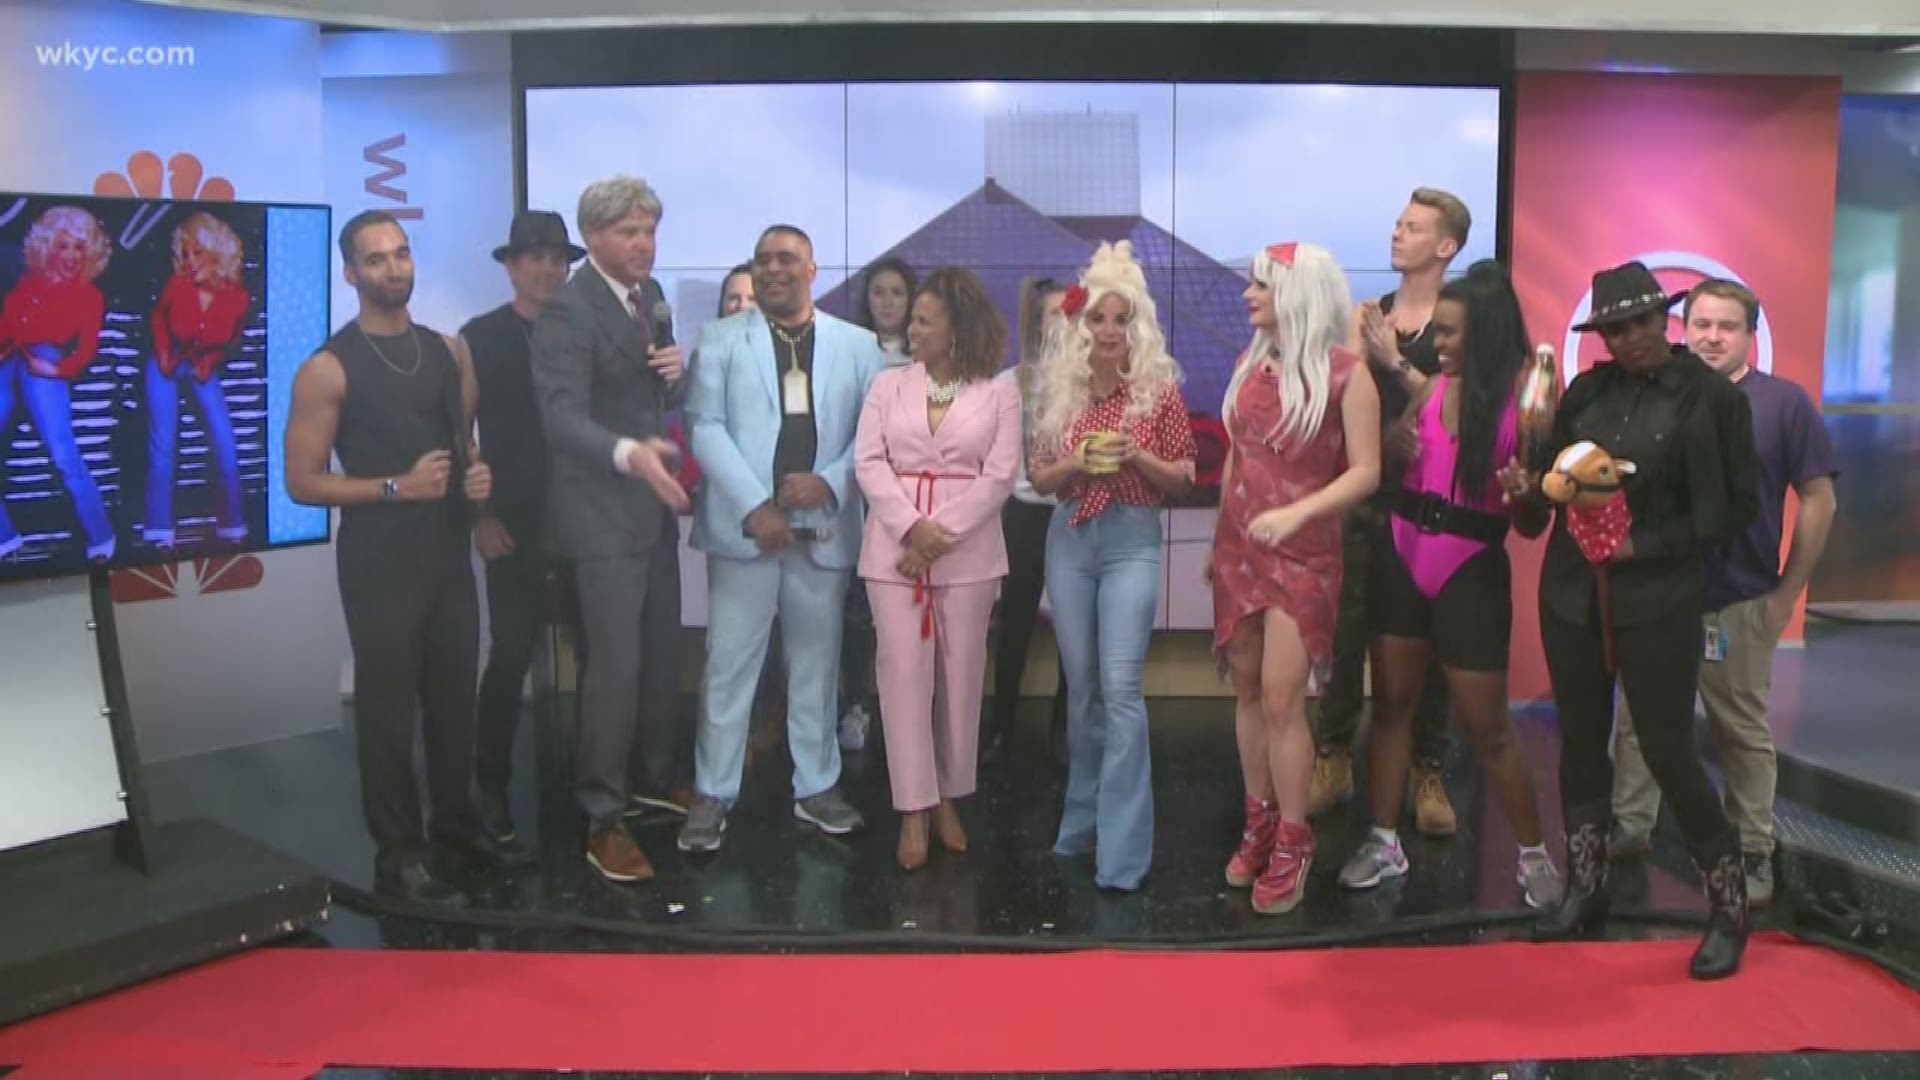 Cleveland is the rock 'n' roll city -- and the stars took over our morning show just in time for Halloween! Check out our epic Halloween spooktacular costume reveal.